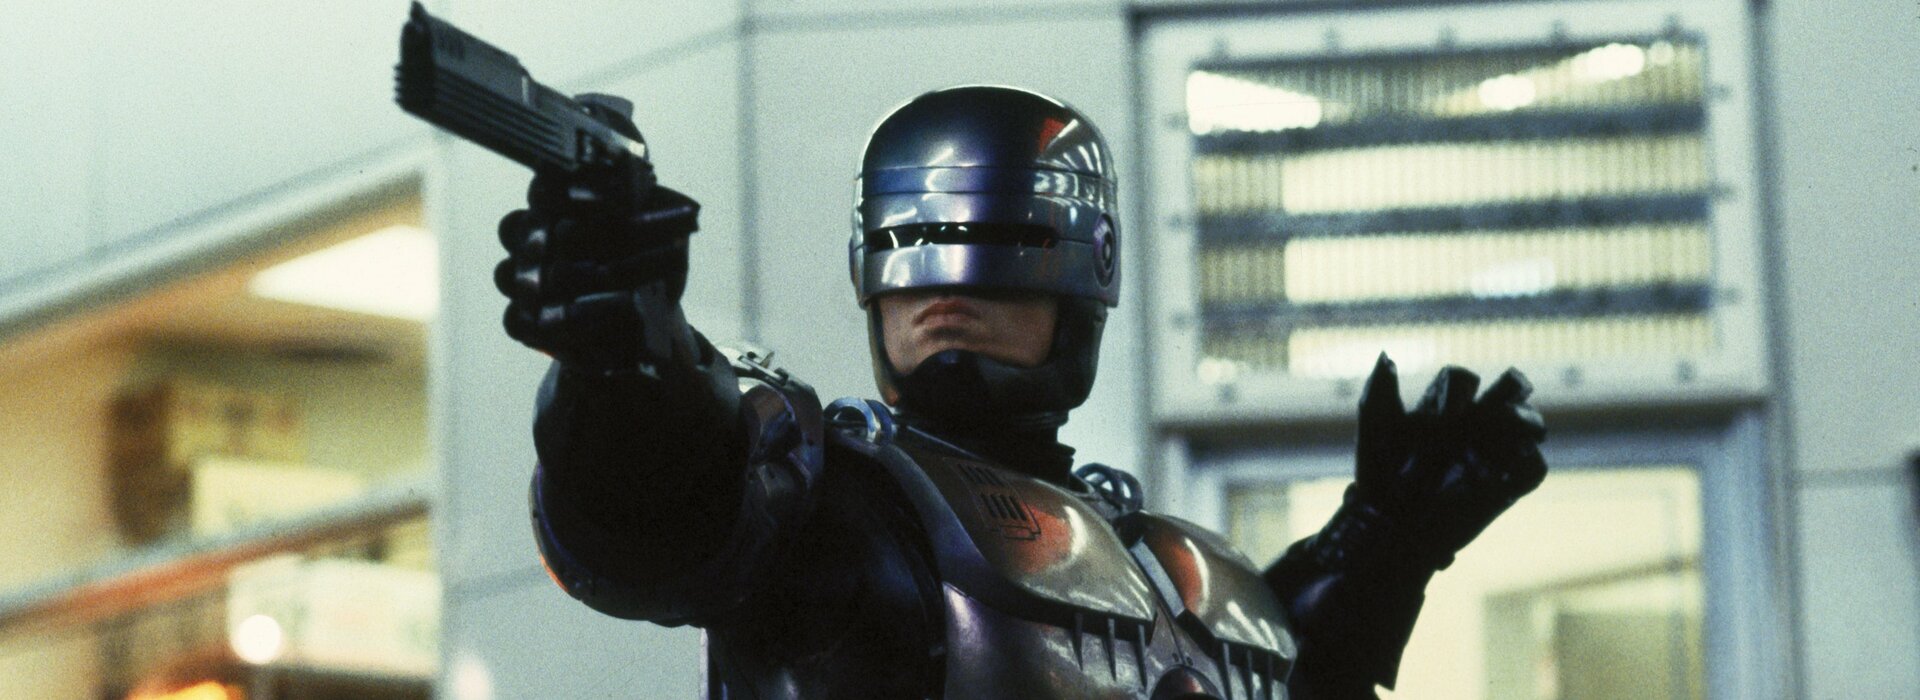 Robocop | © Orion Pictures / MGM